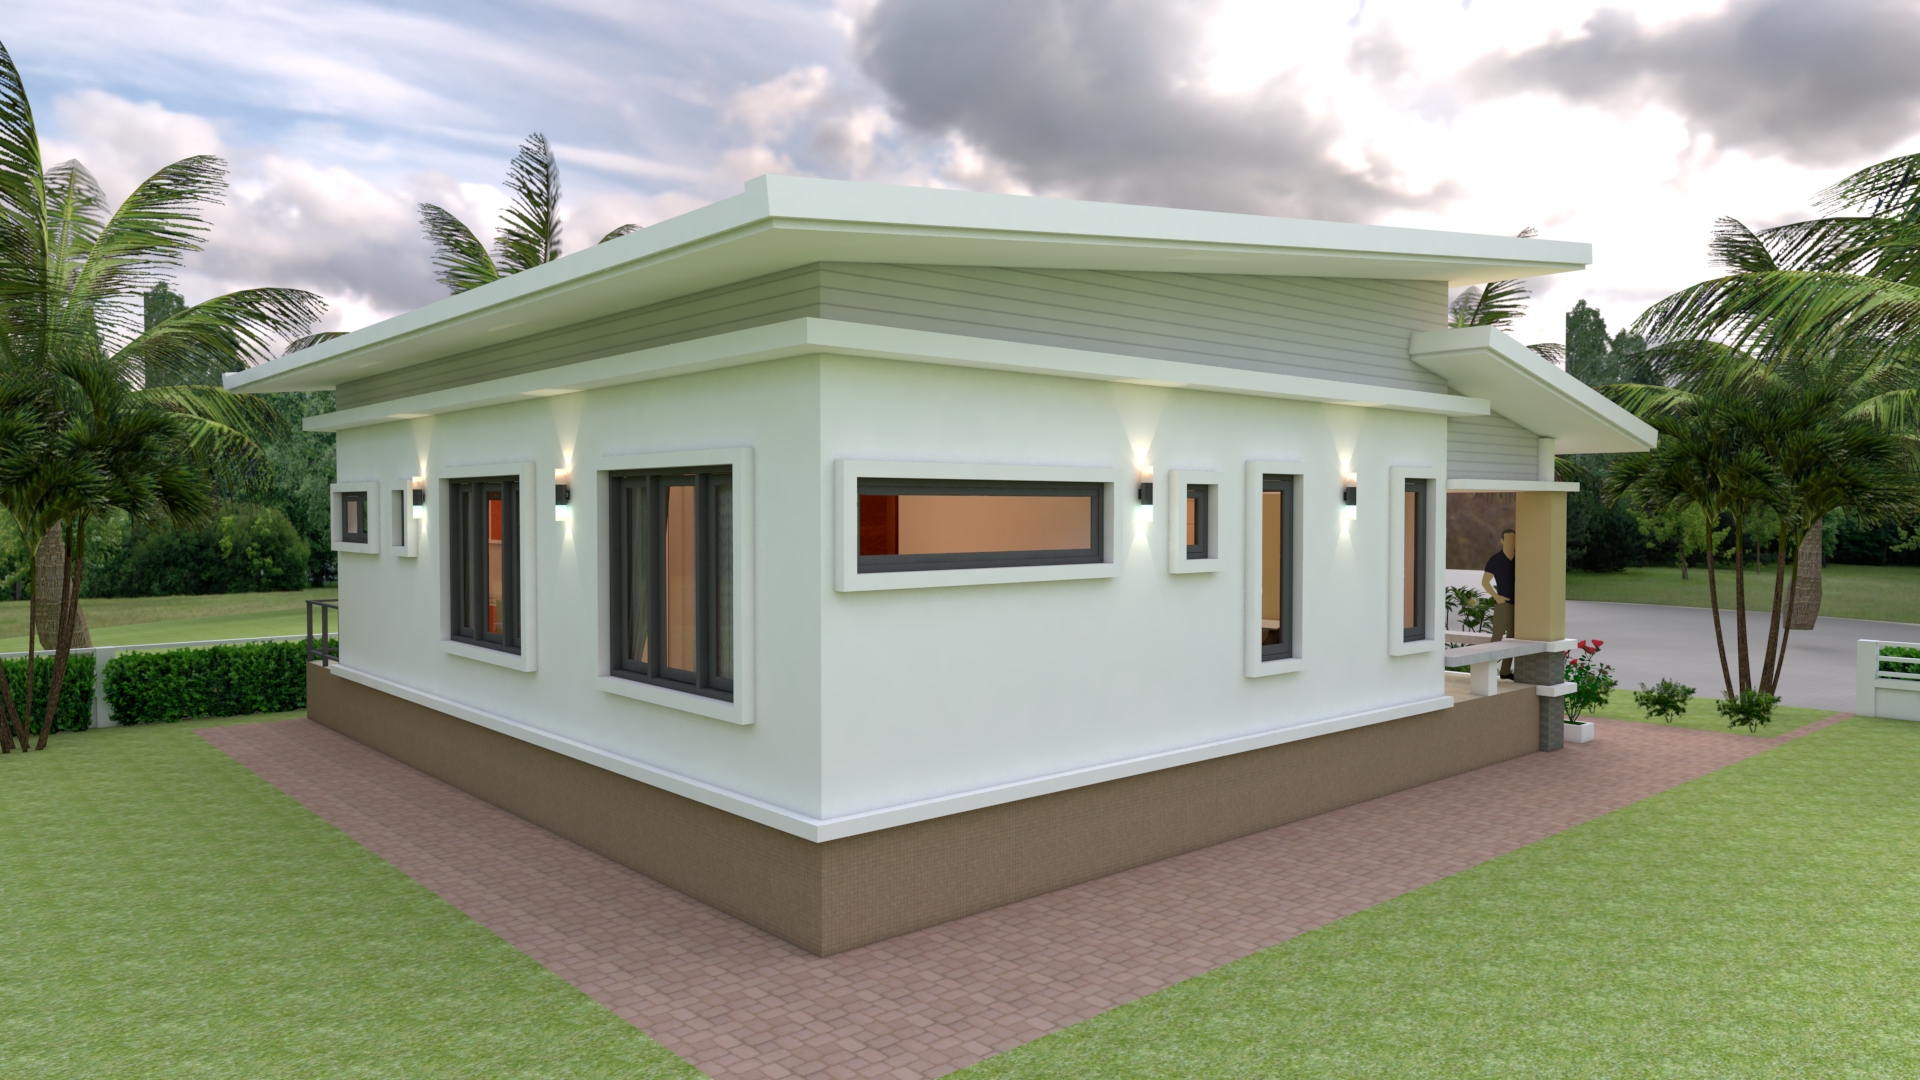 House Design 3d 10x10 Meter 33x33 Feet 3 Bedrooms Shed roof